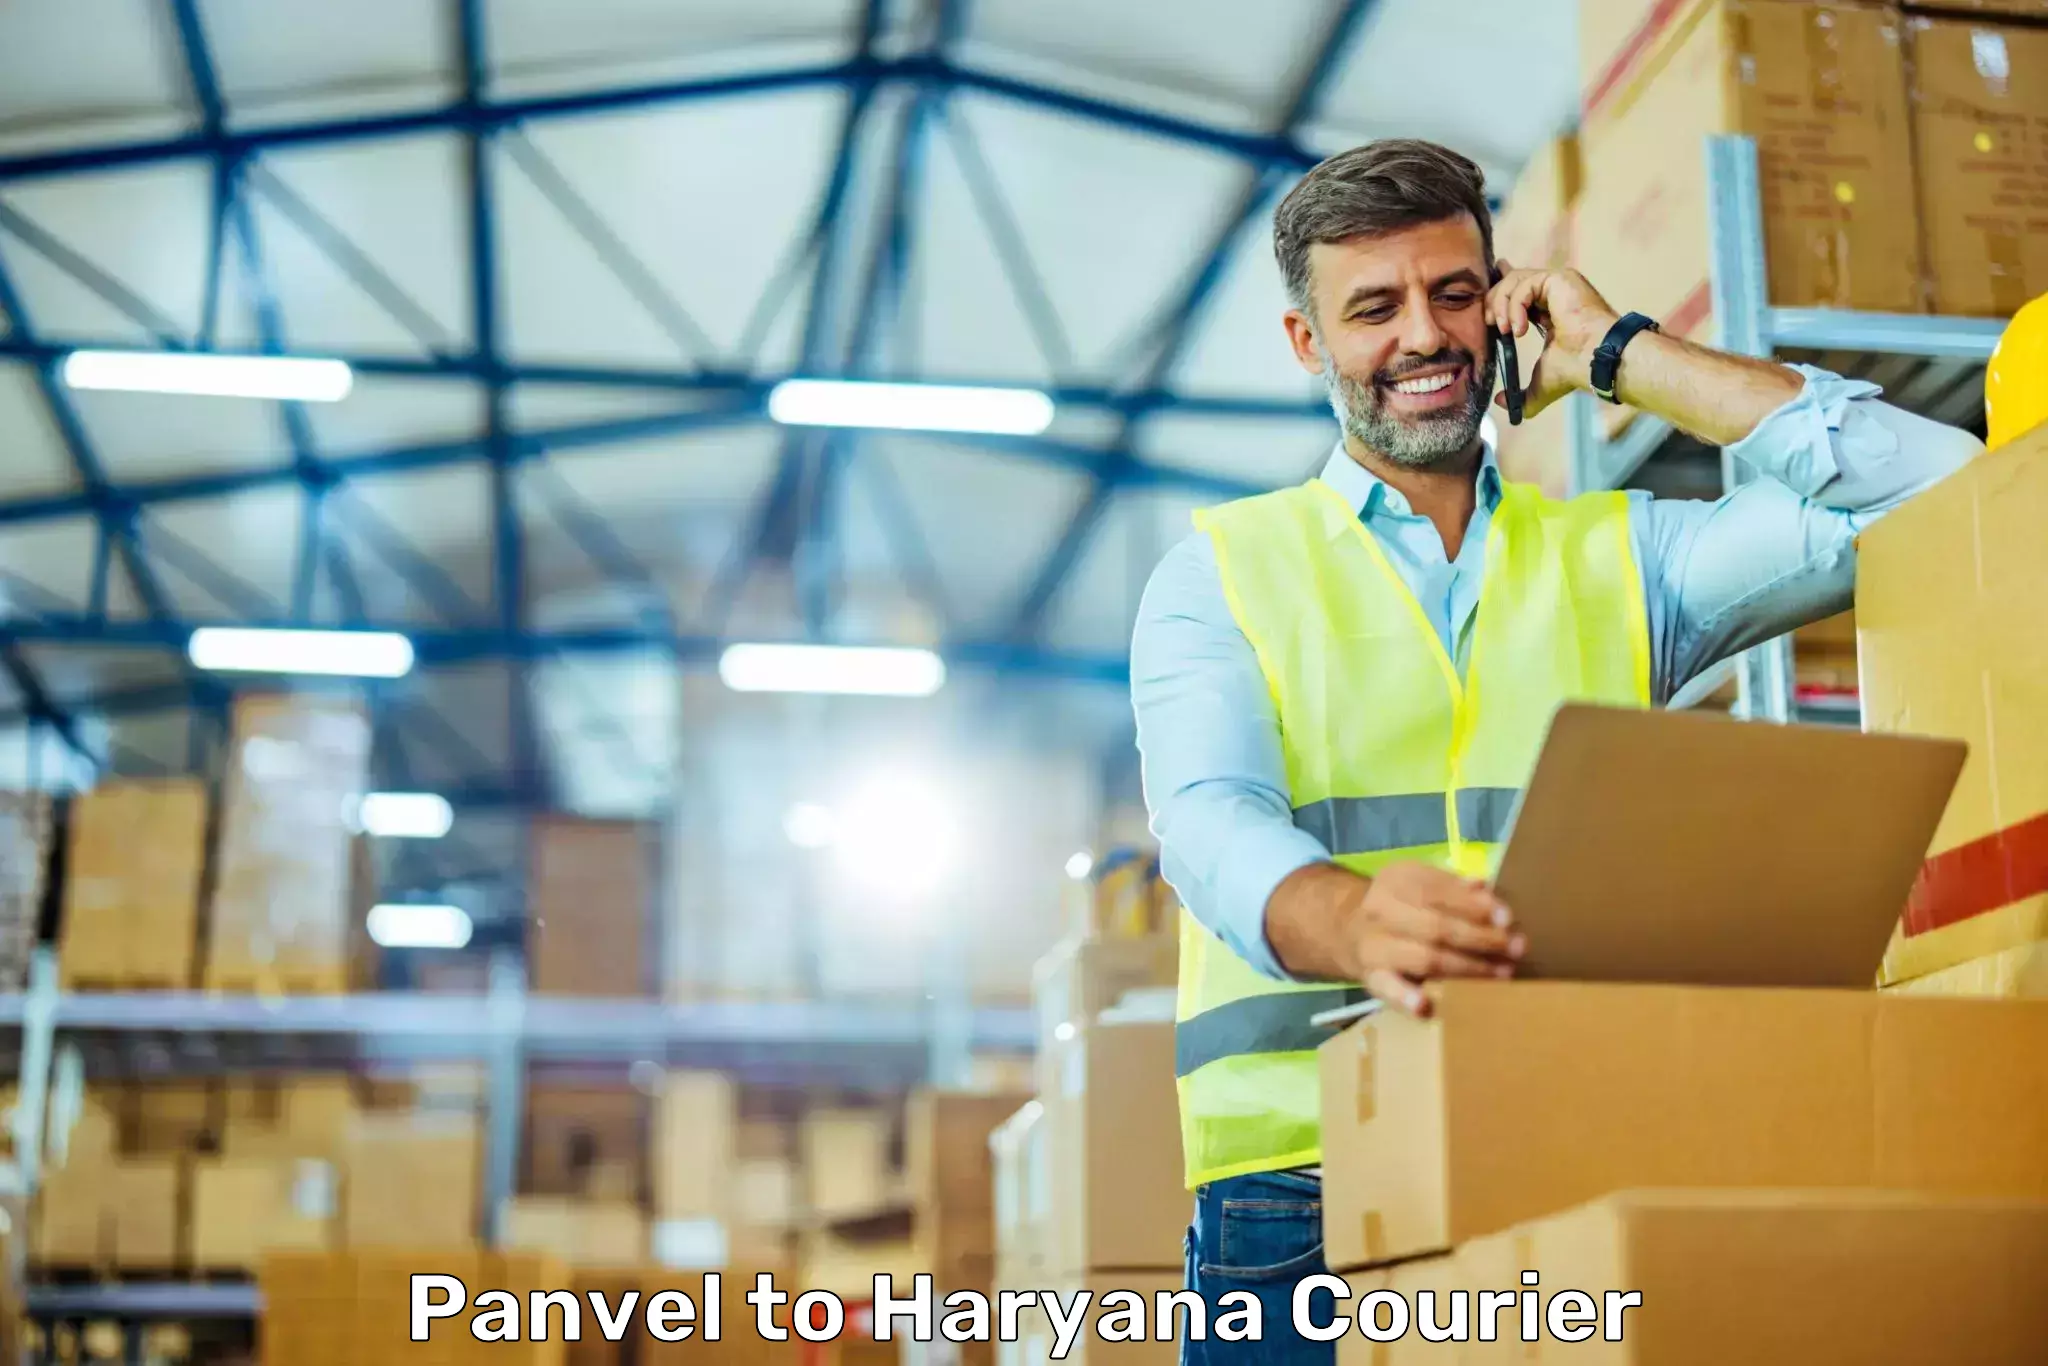 User-friendly courier app Panvel to Chirya